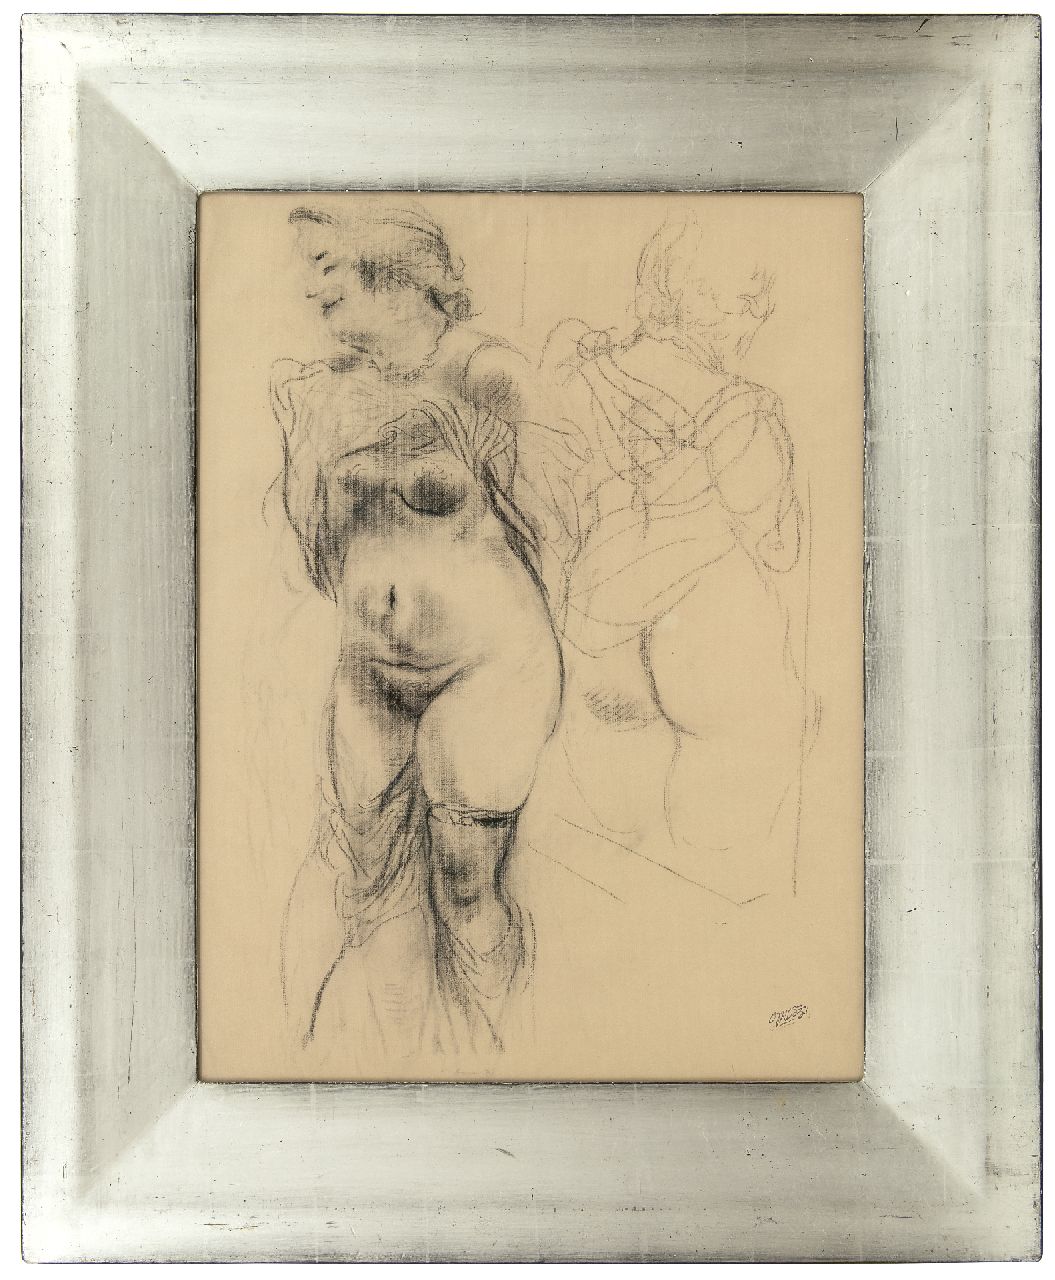 Grosz G.  | George 'Georg' Grosz, Nude with miror image, charcoal on paper 62.0 x 47.0 cm, signed l.r. with stamped signature and to be dated 1939